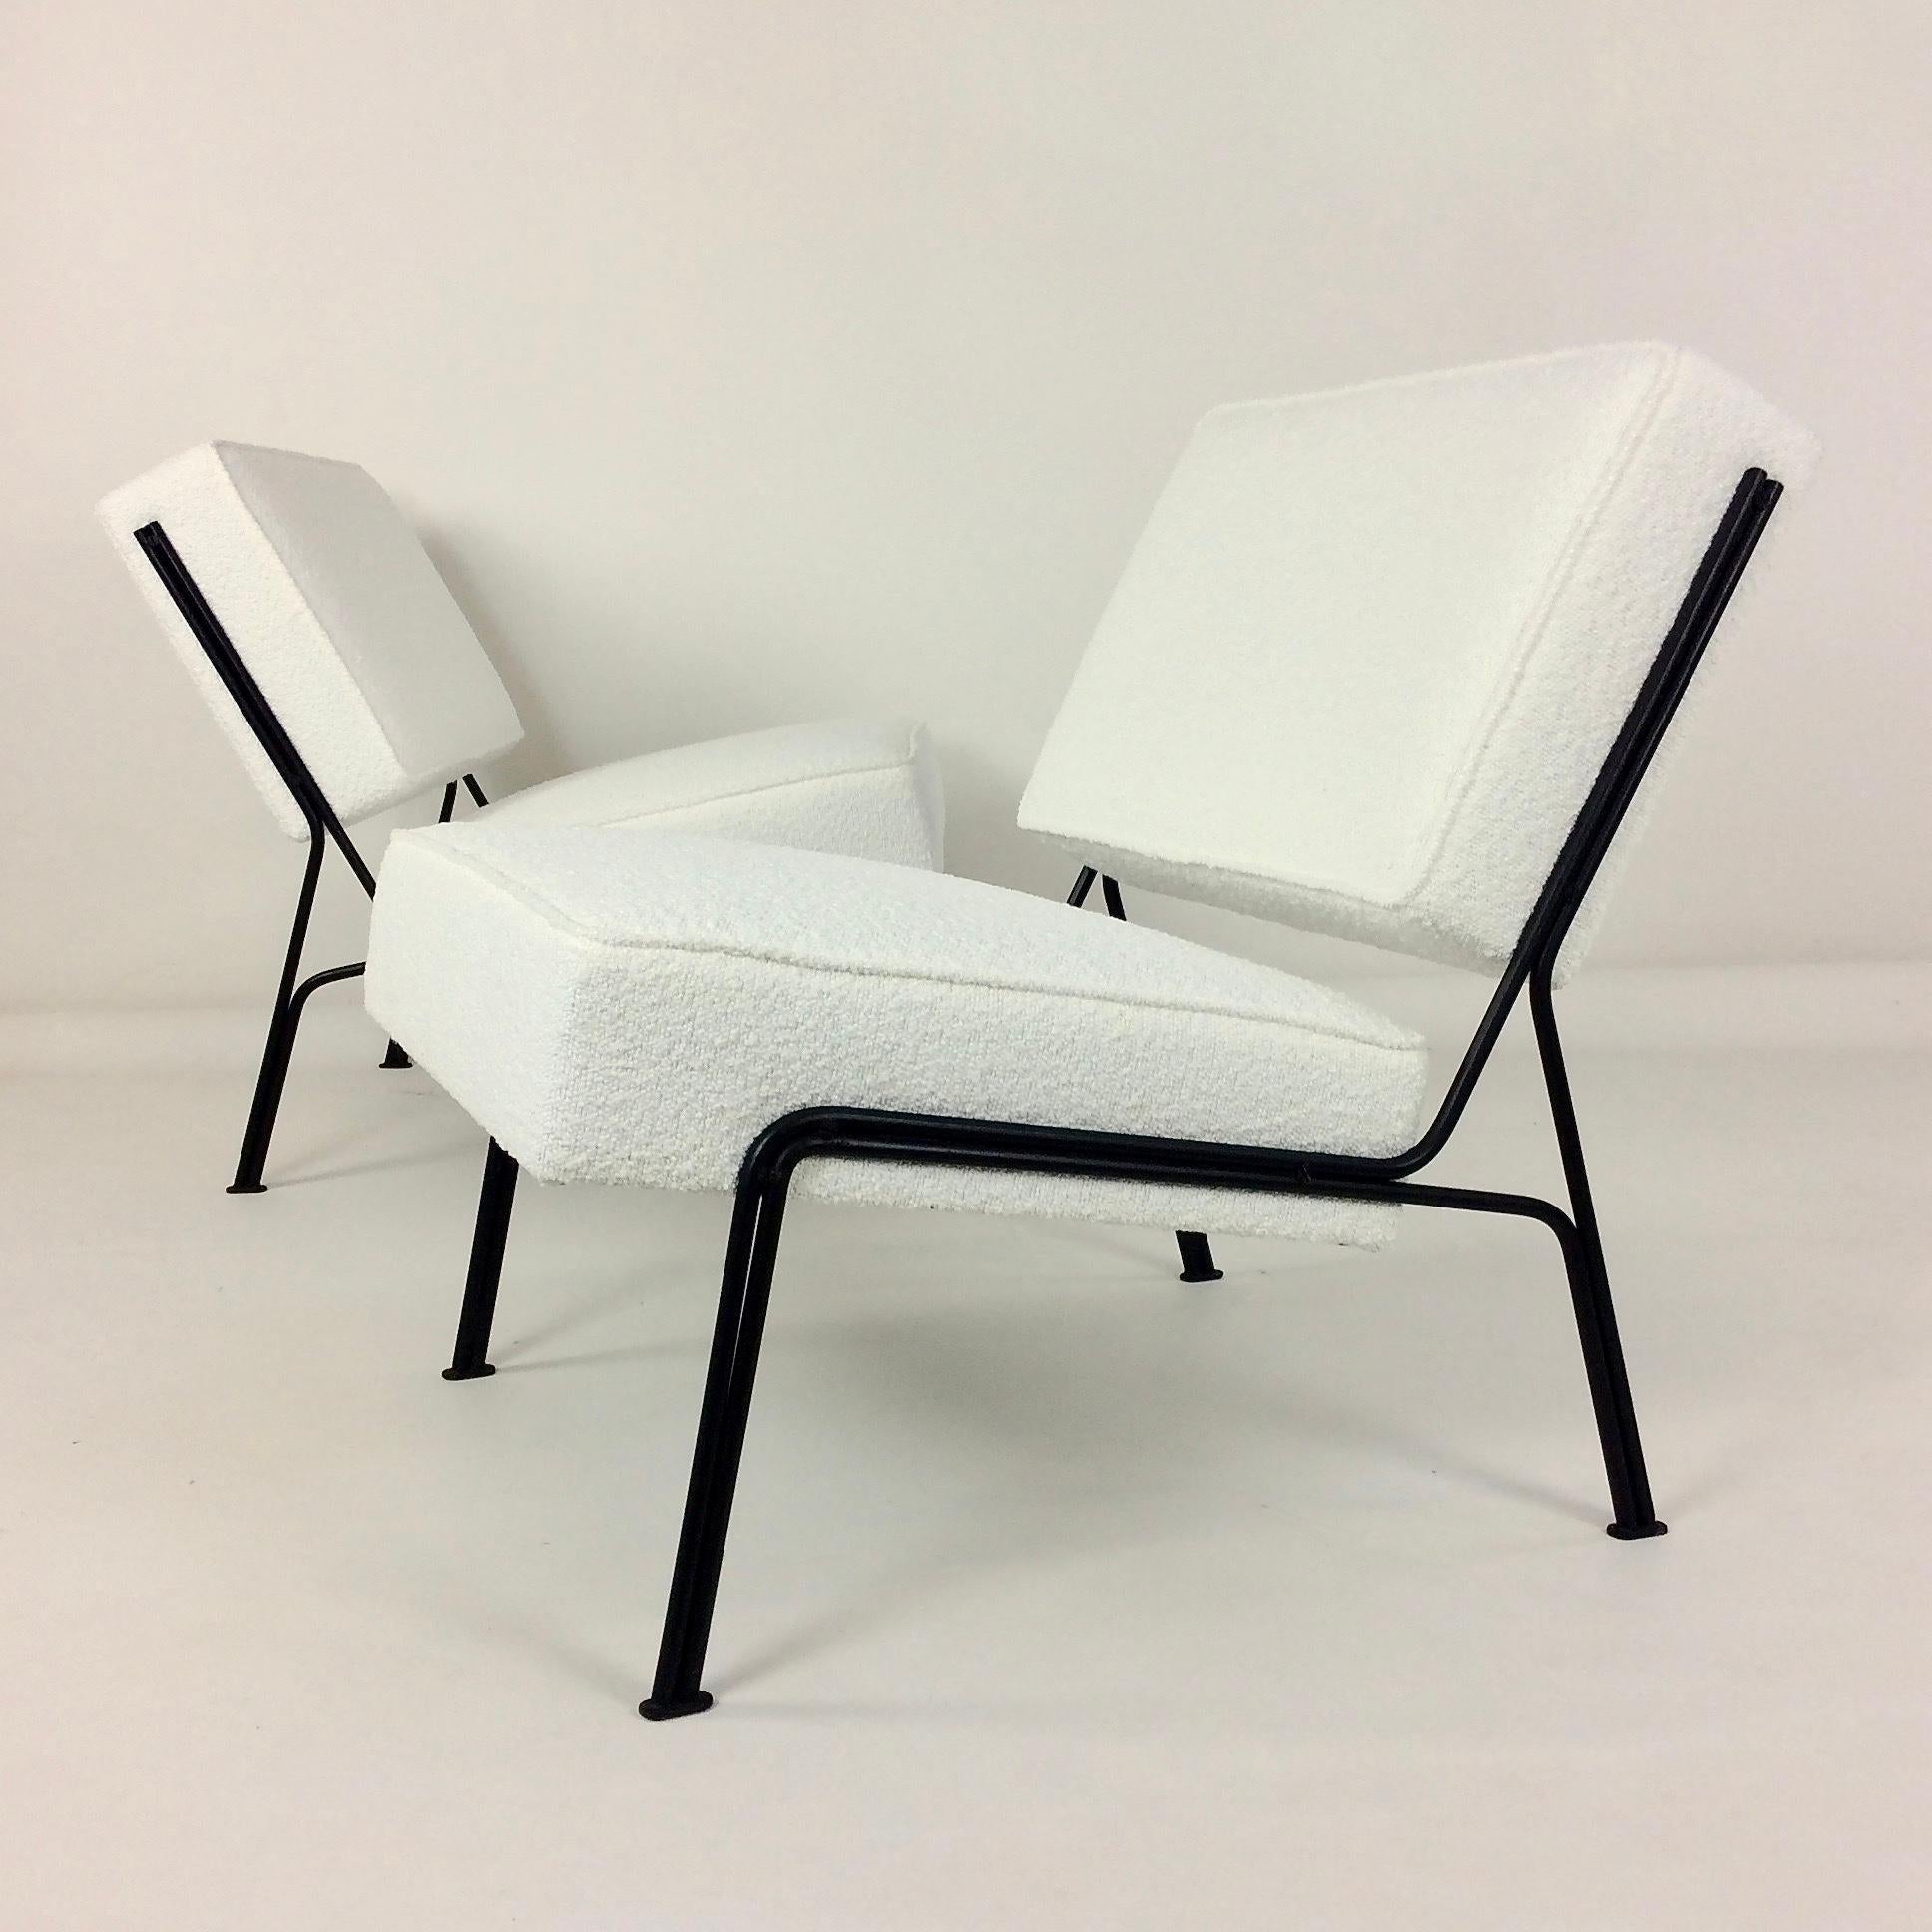 Mid-Century Modern Pair of G2 Chairs By A.R.P. Guariche, Motte, Mortier for Airborne, 1953, France.